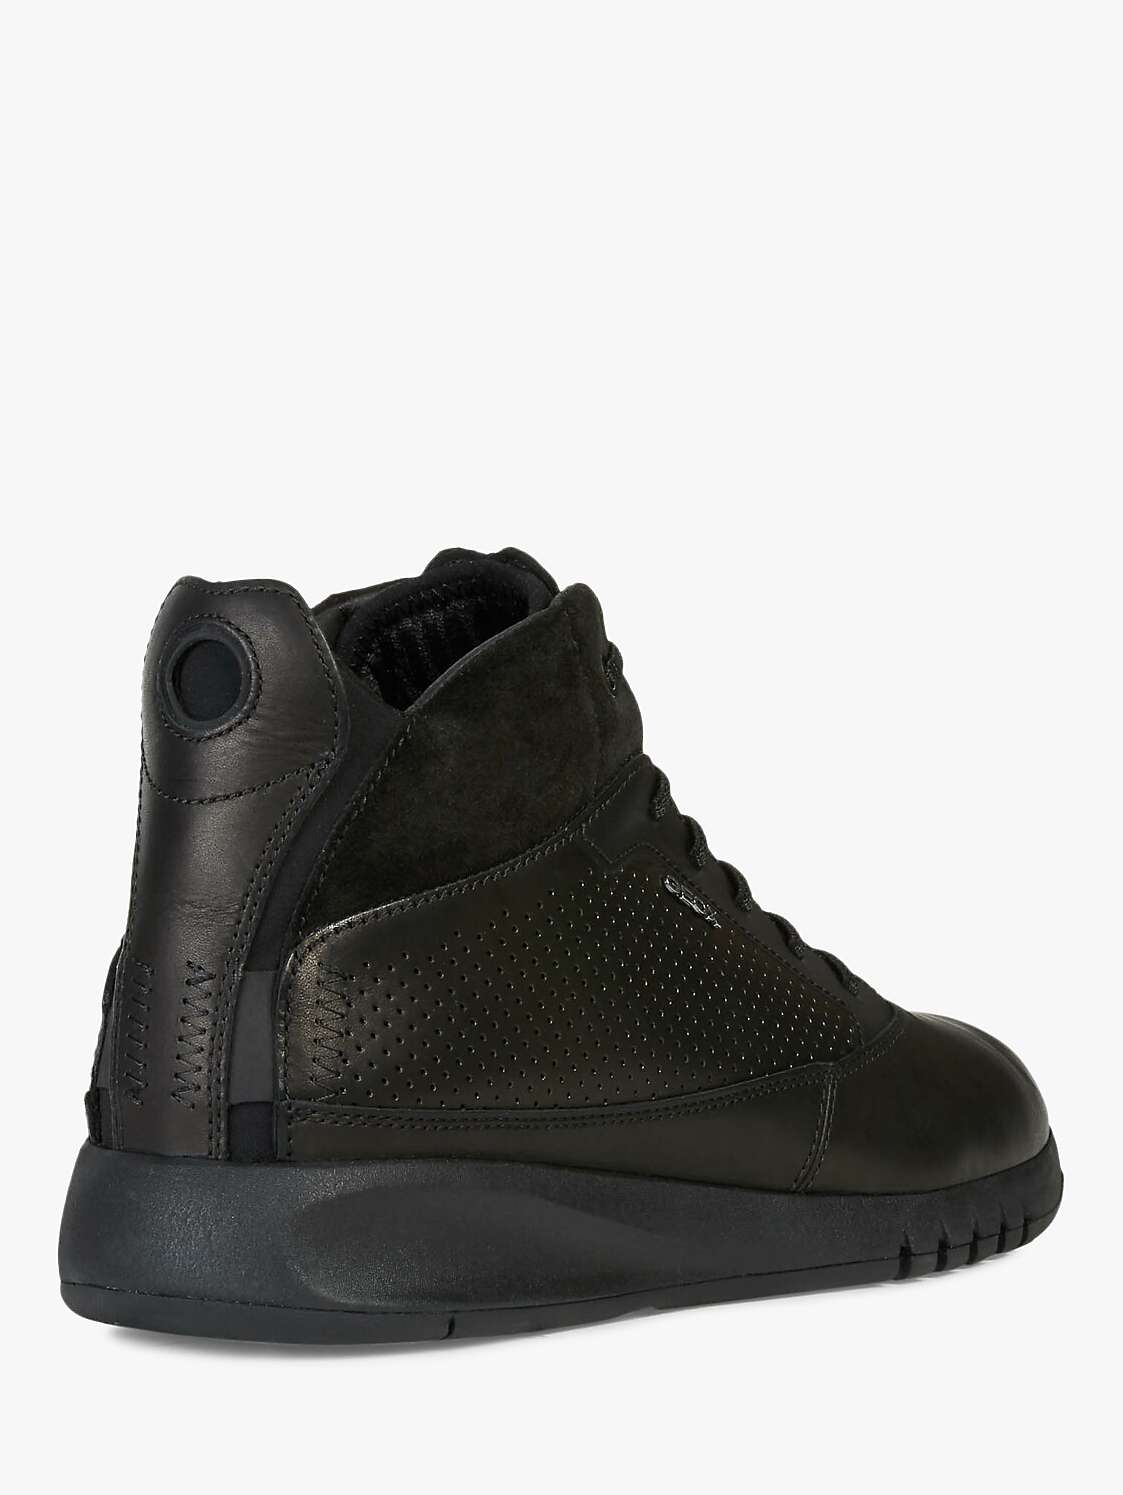 Buy Geox Aerantis High Top Leather Trainers, Black Online at johnlewis.com